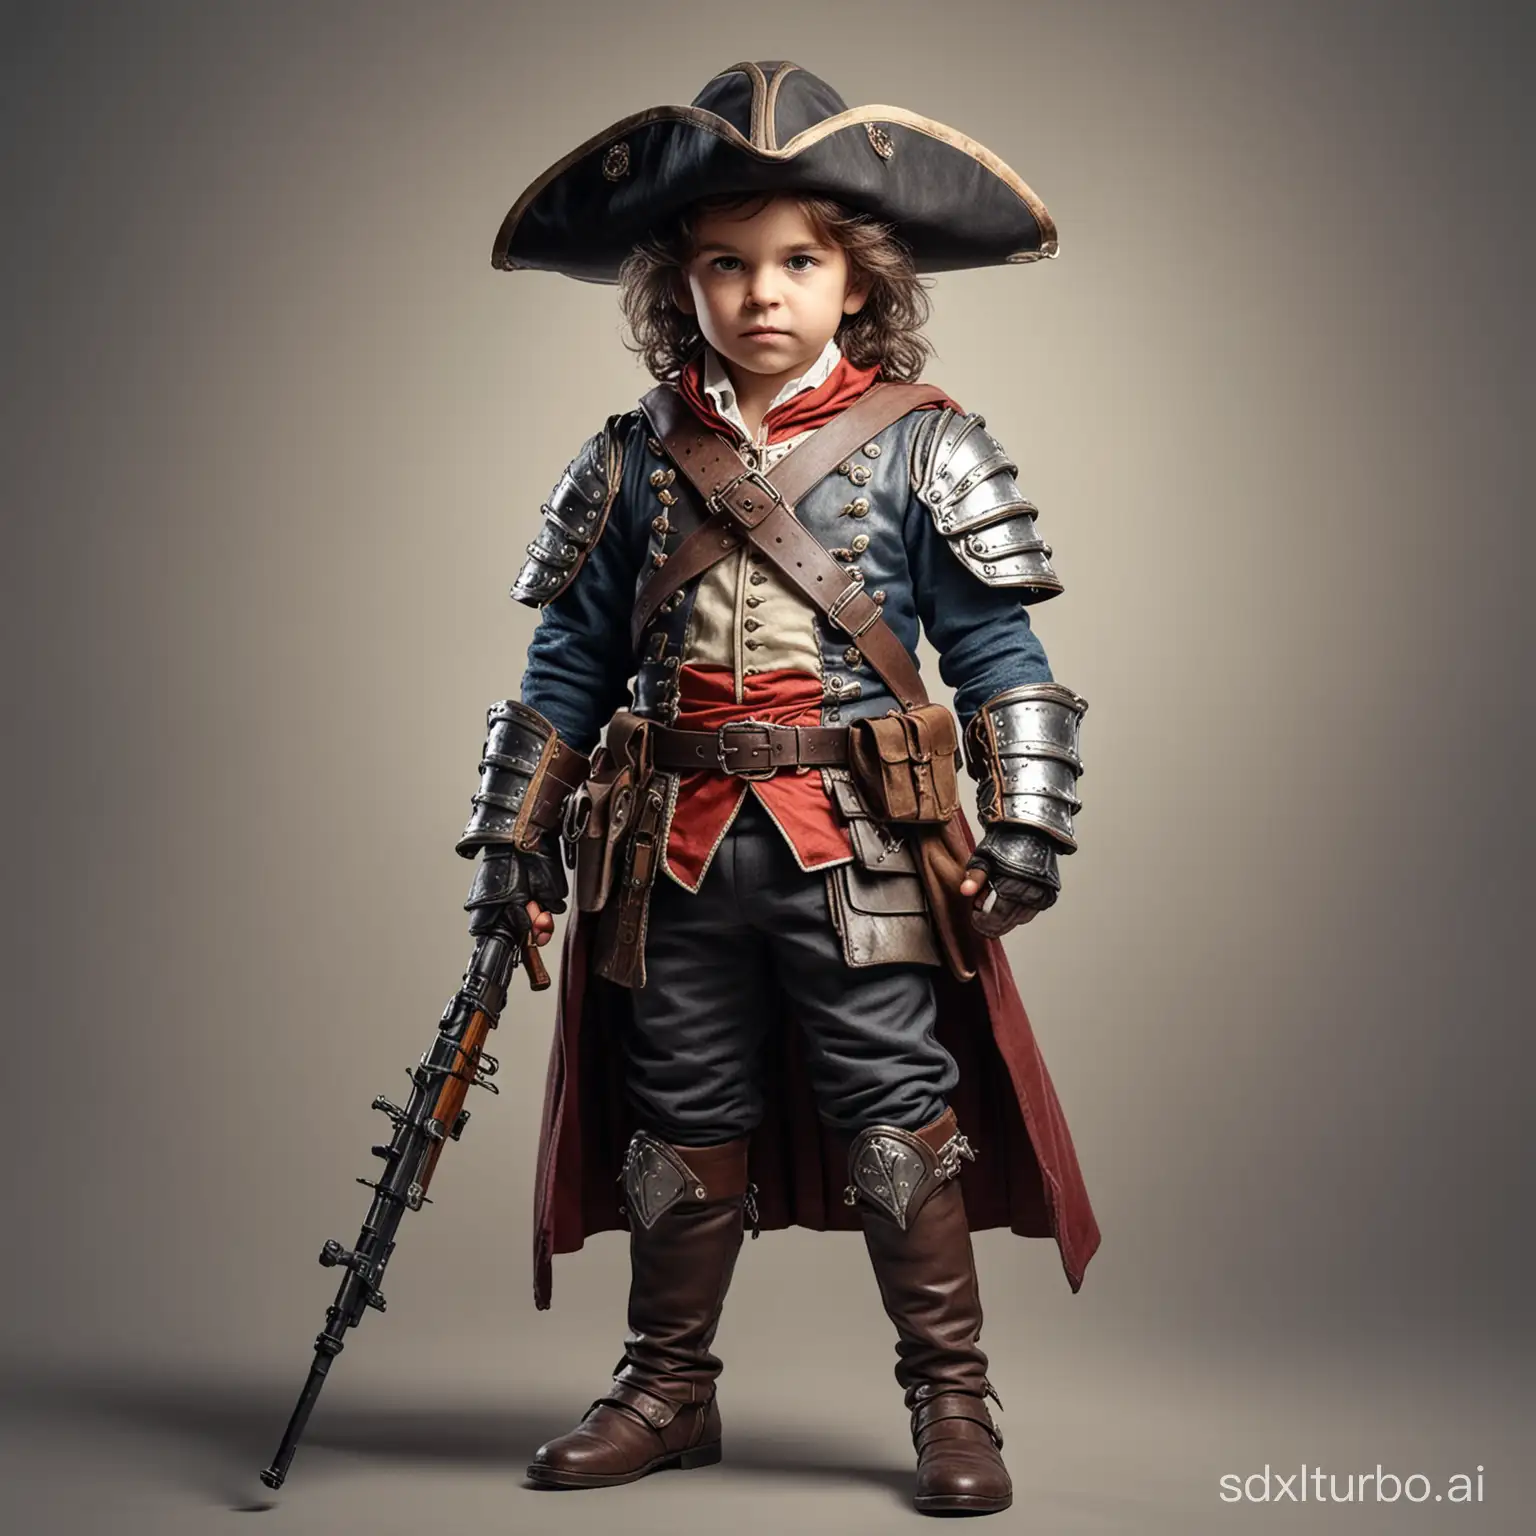 Young-Musketeer-Character-in-Full-Armor-with-Assault-Rifle